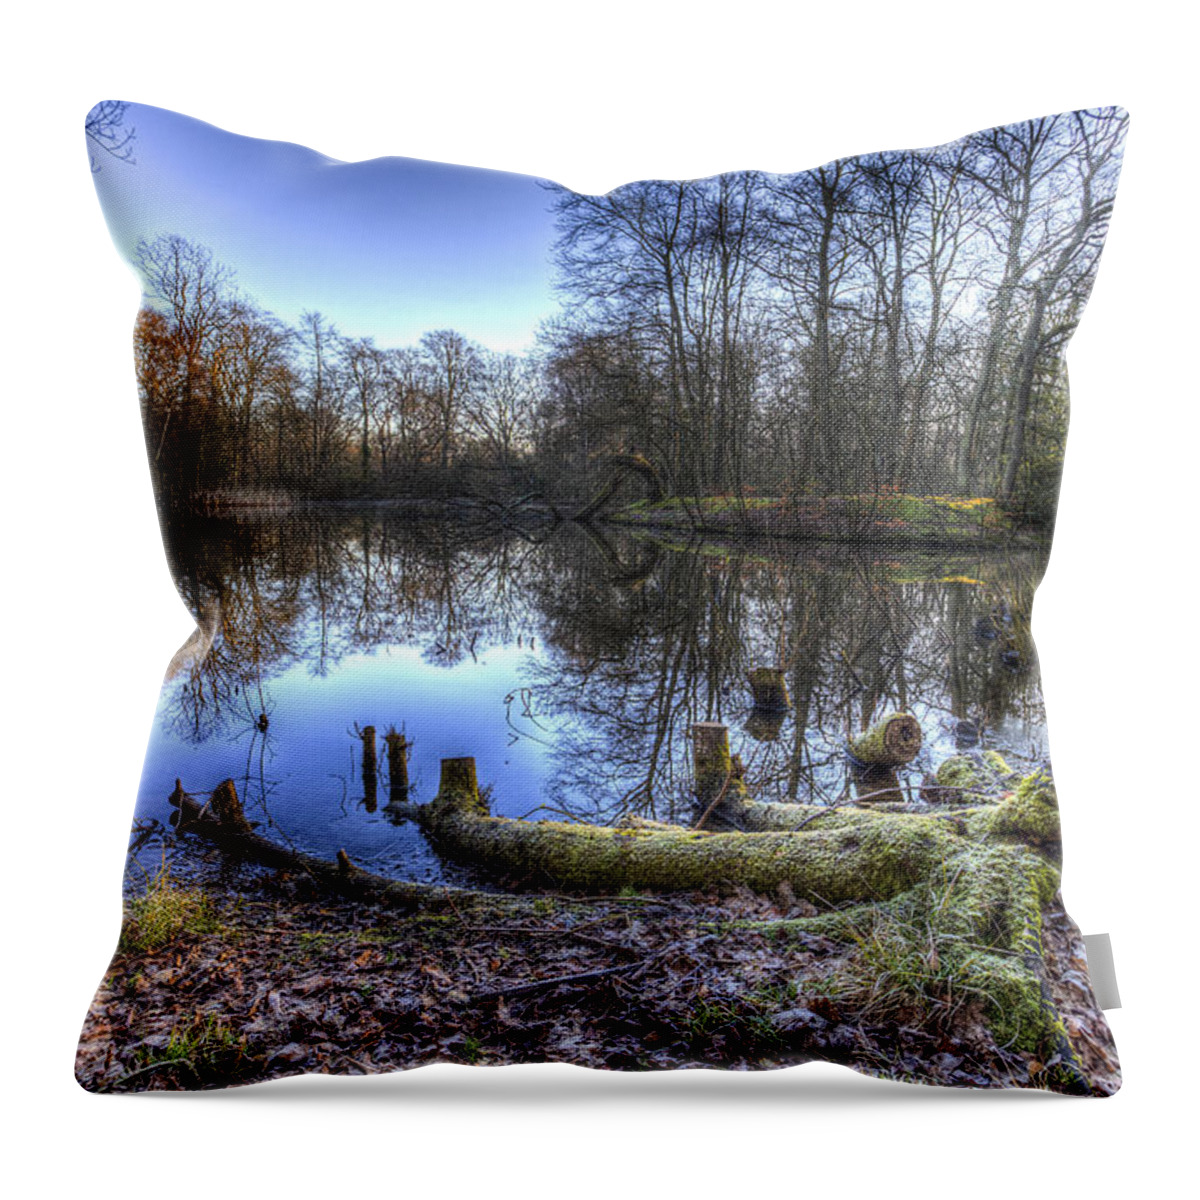 Frost Throw Pillow featuring the photograph The Frosty Morning Pond by David Pyatt